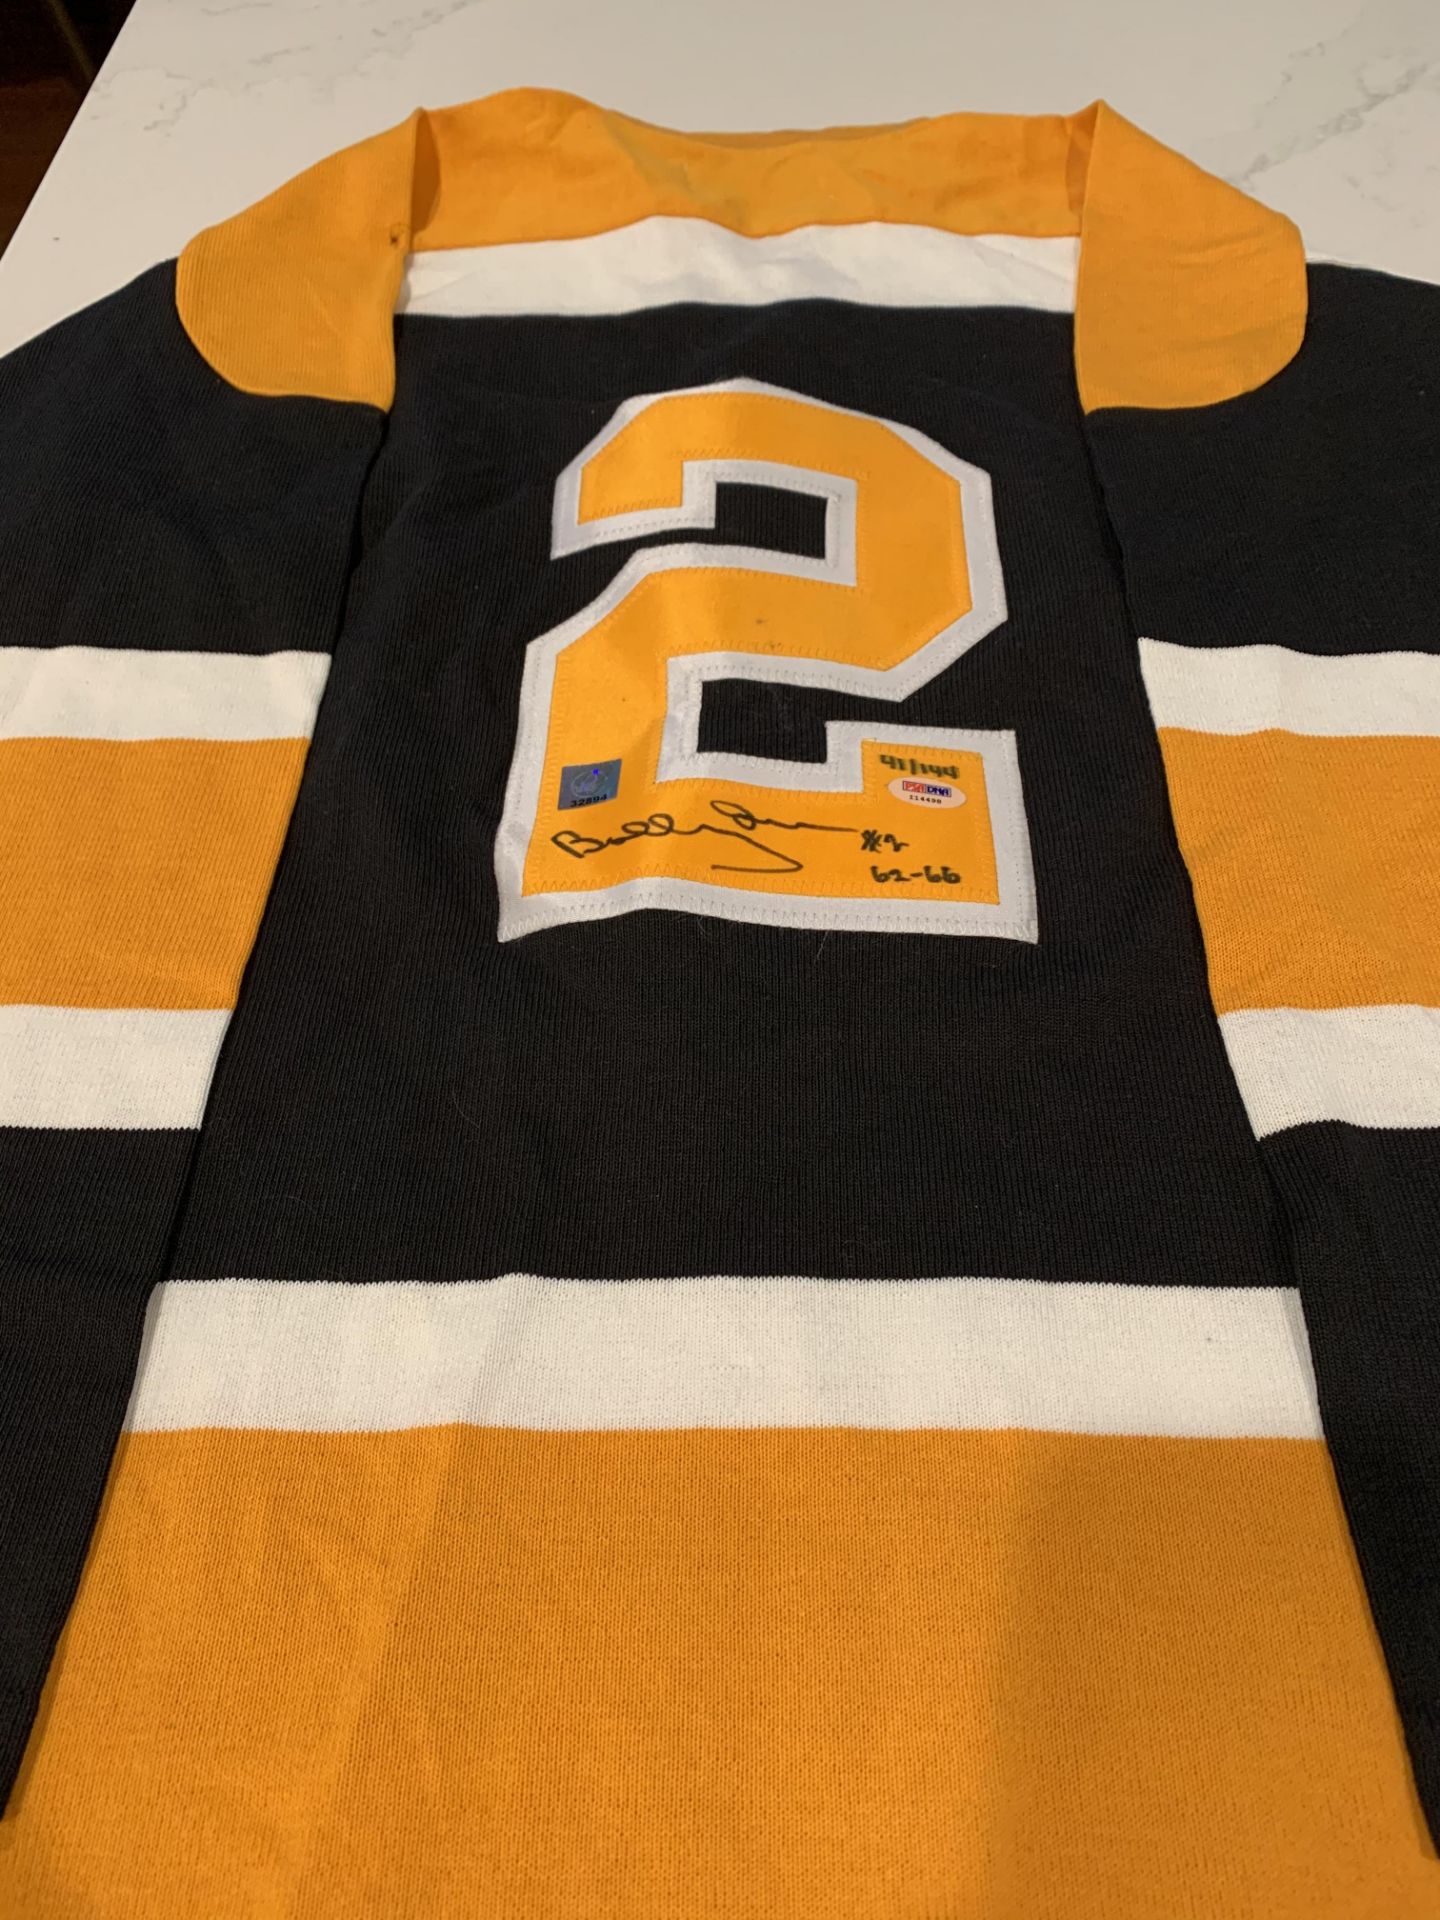 Bobby Orr Autographed Oshawa Generals Captains Jersey (Junior League) Not Game Worn. Has COA Tag.